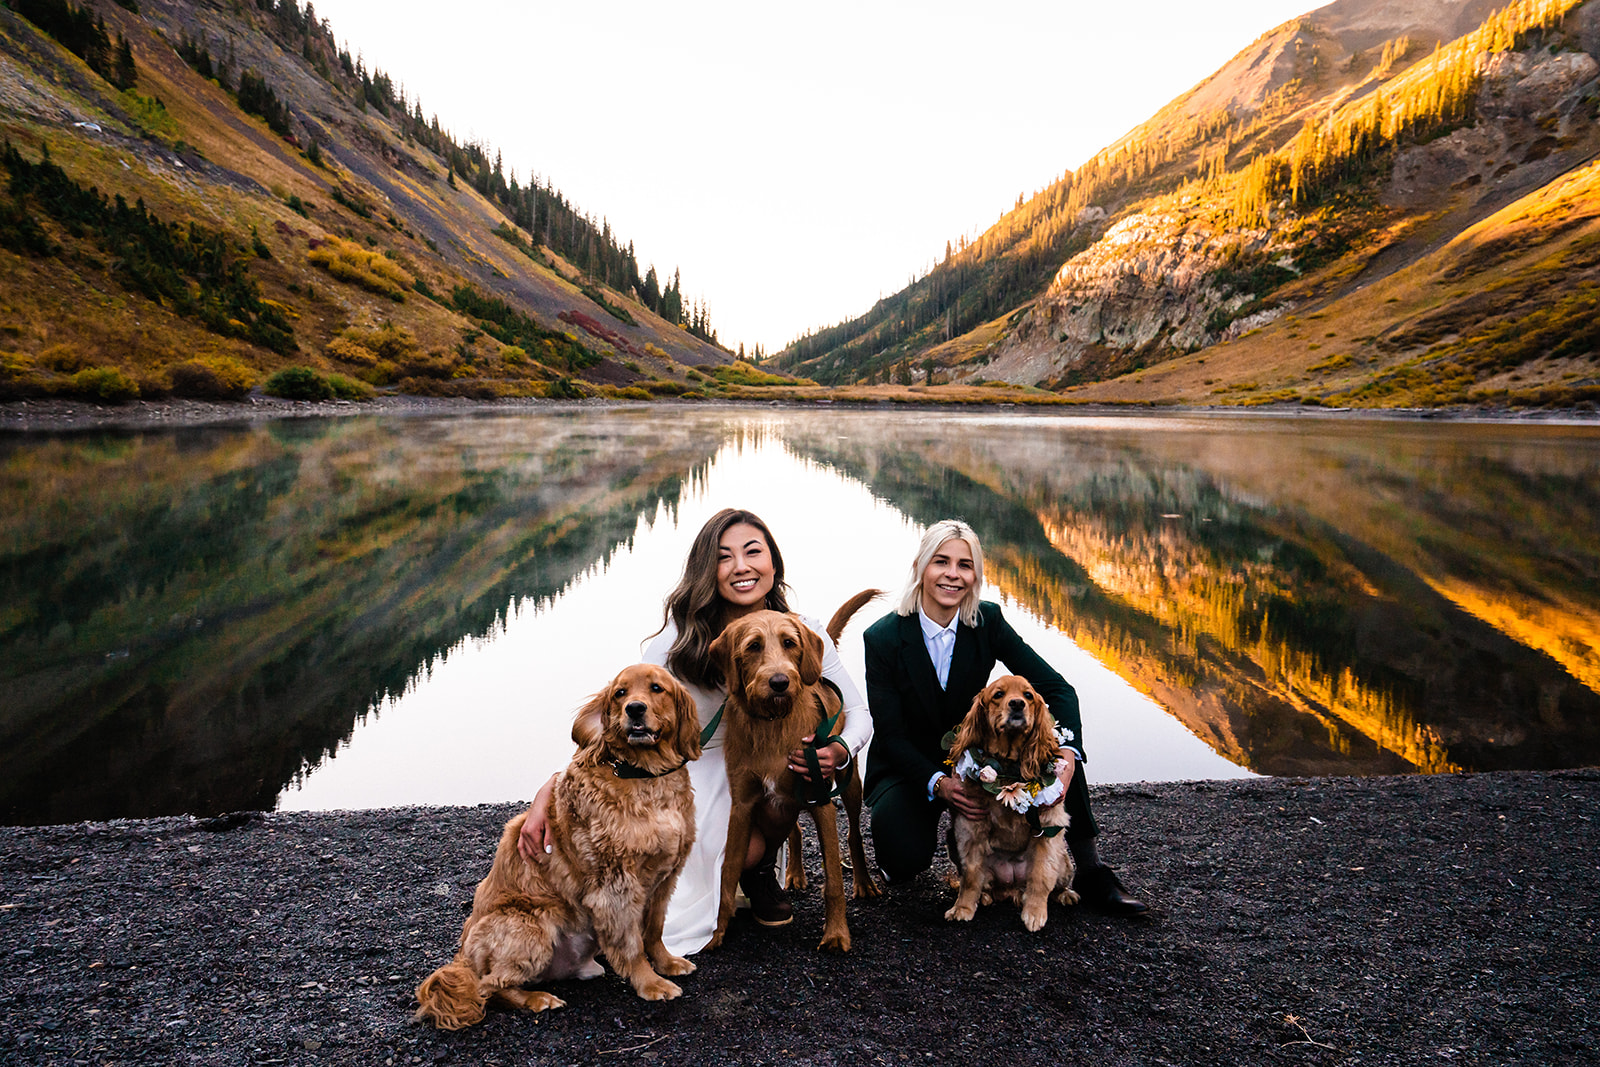 A beautiful lesbian elopement day with dogs